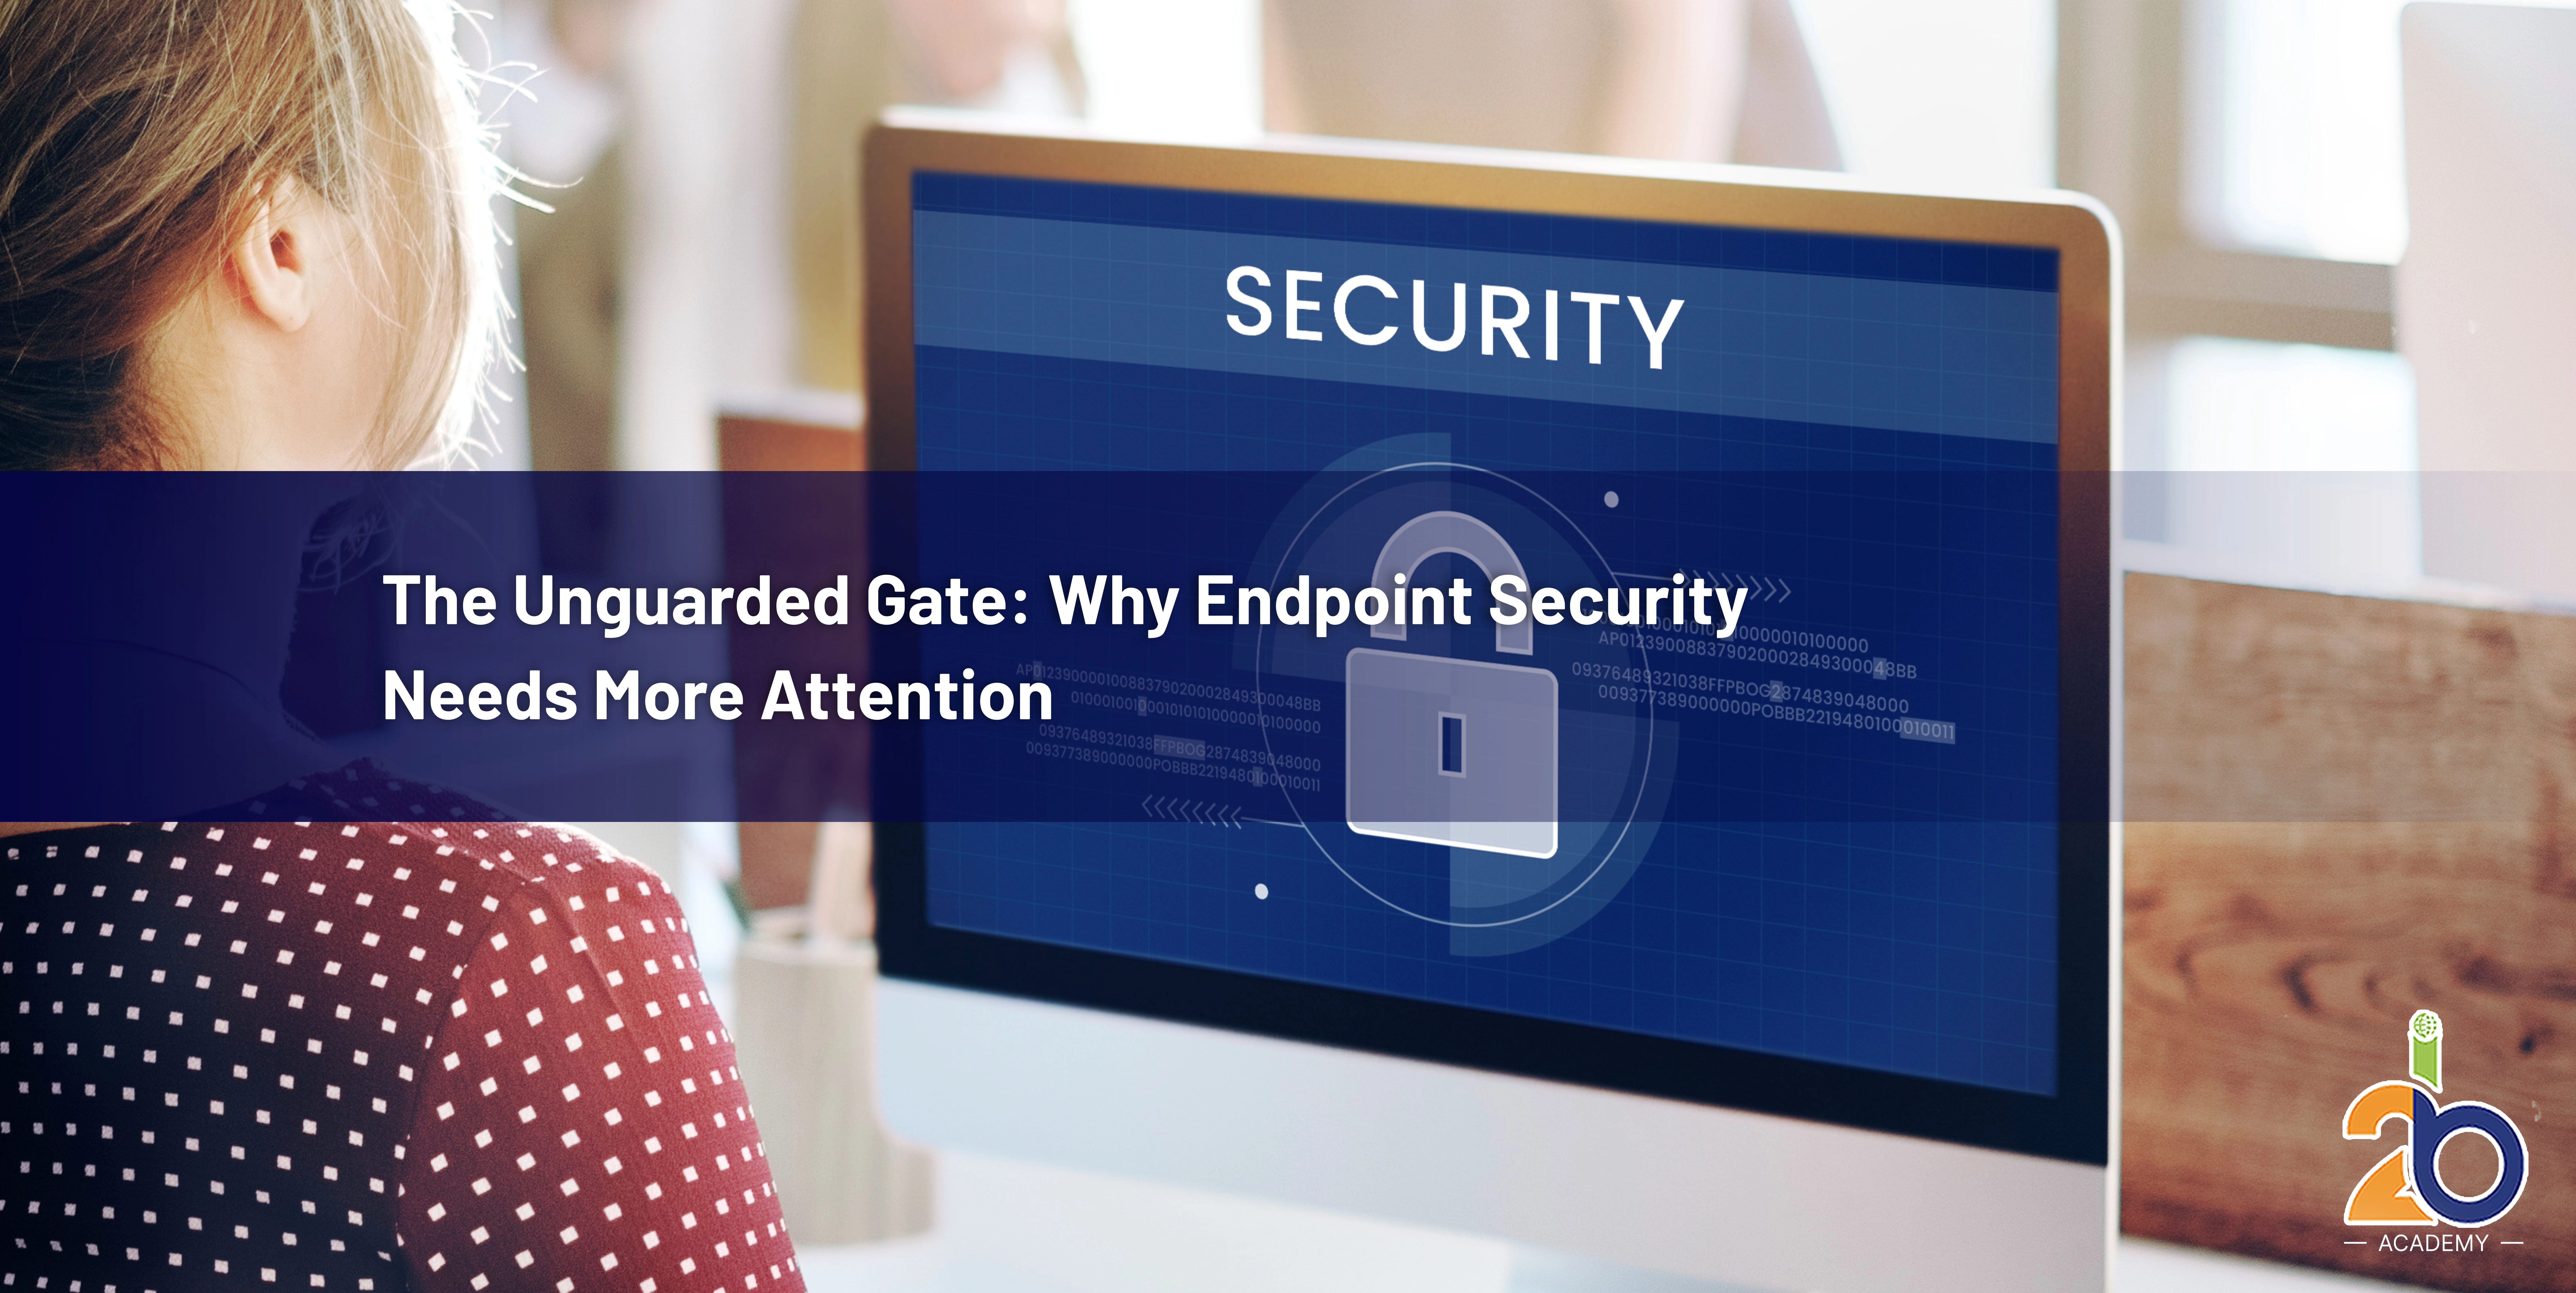 The Unguarded Gate: Why Endpoint Security Needs More Attention